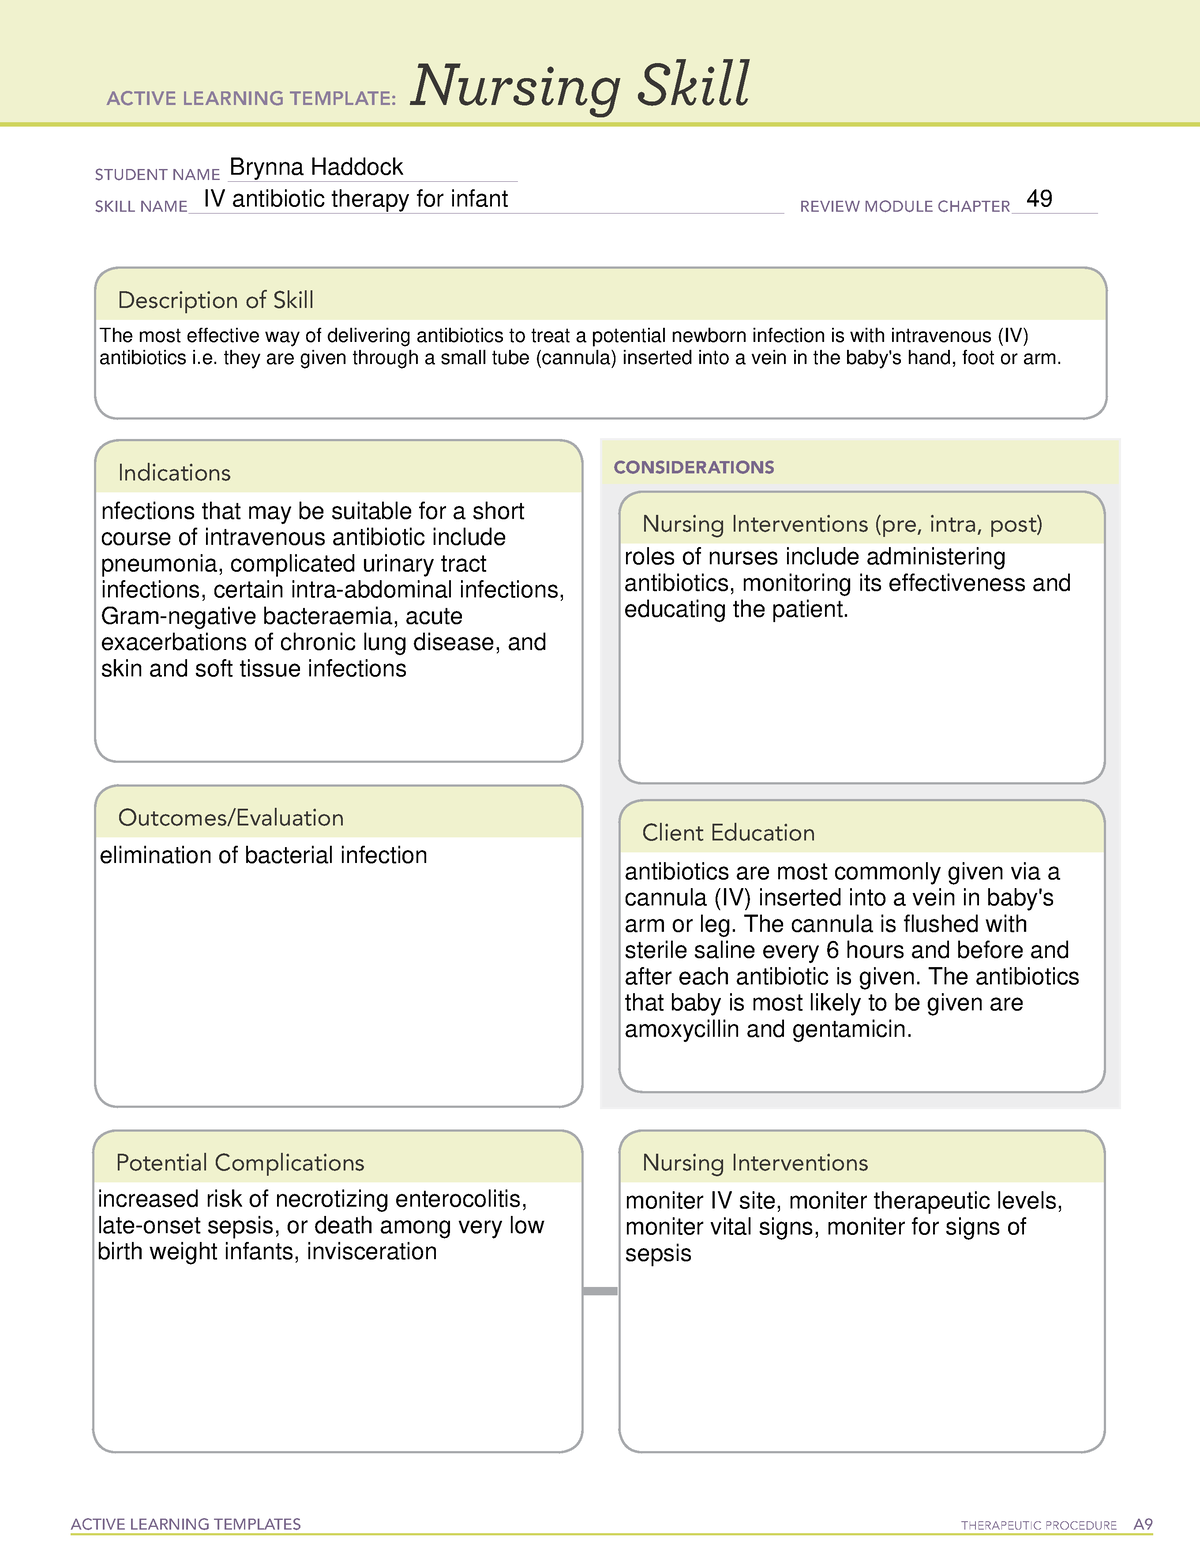 ATI children remediation baby IVs ACTIVE LEARNING TEMPLATES